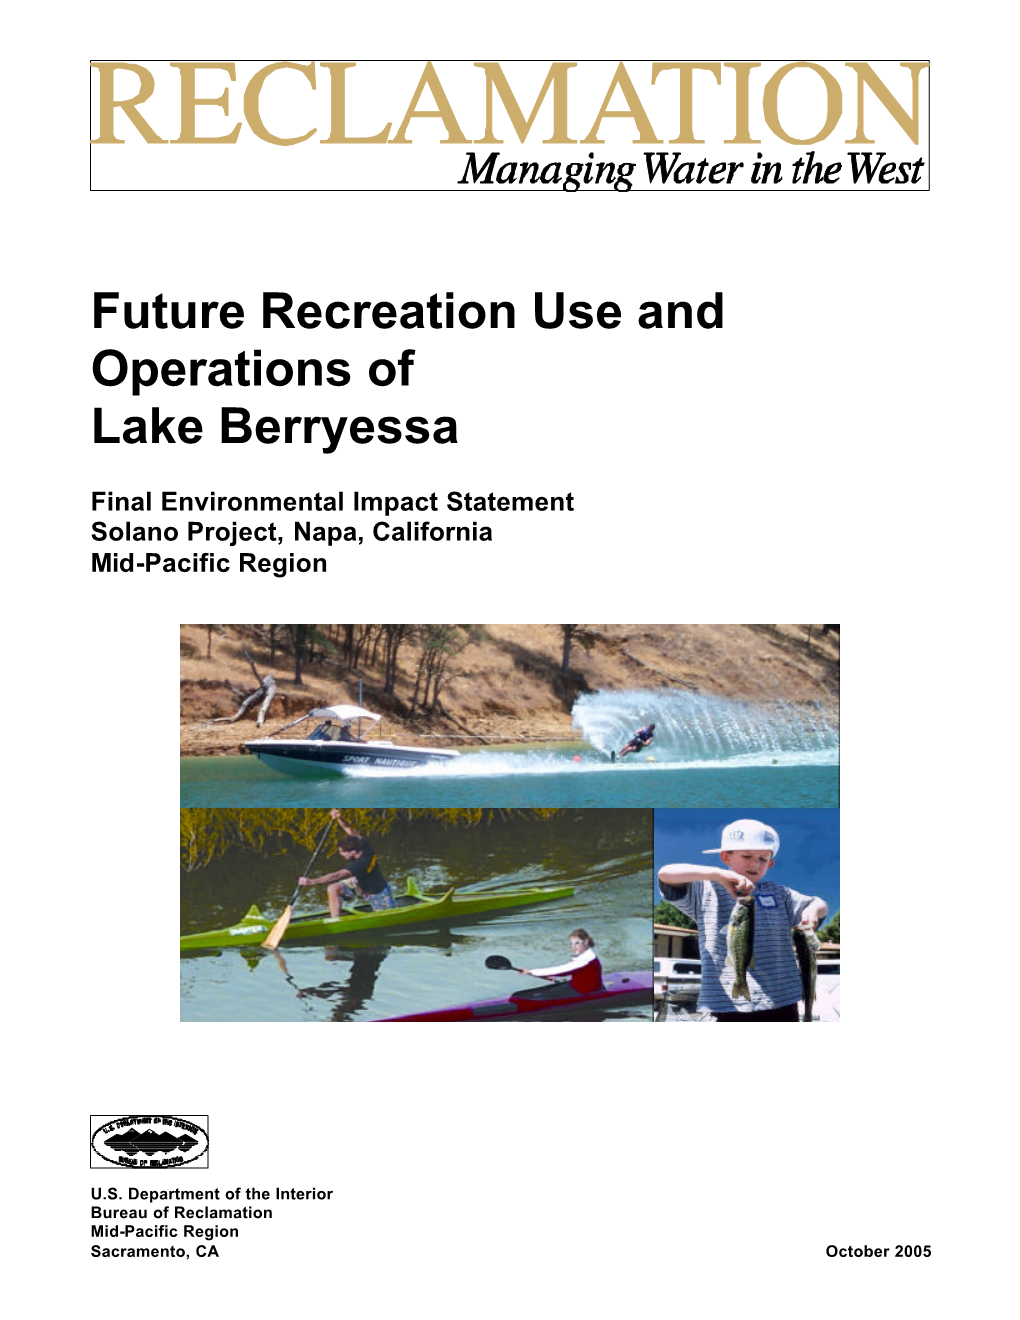 Future Recreation Use and Operations of Lake Berryessa